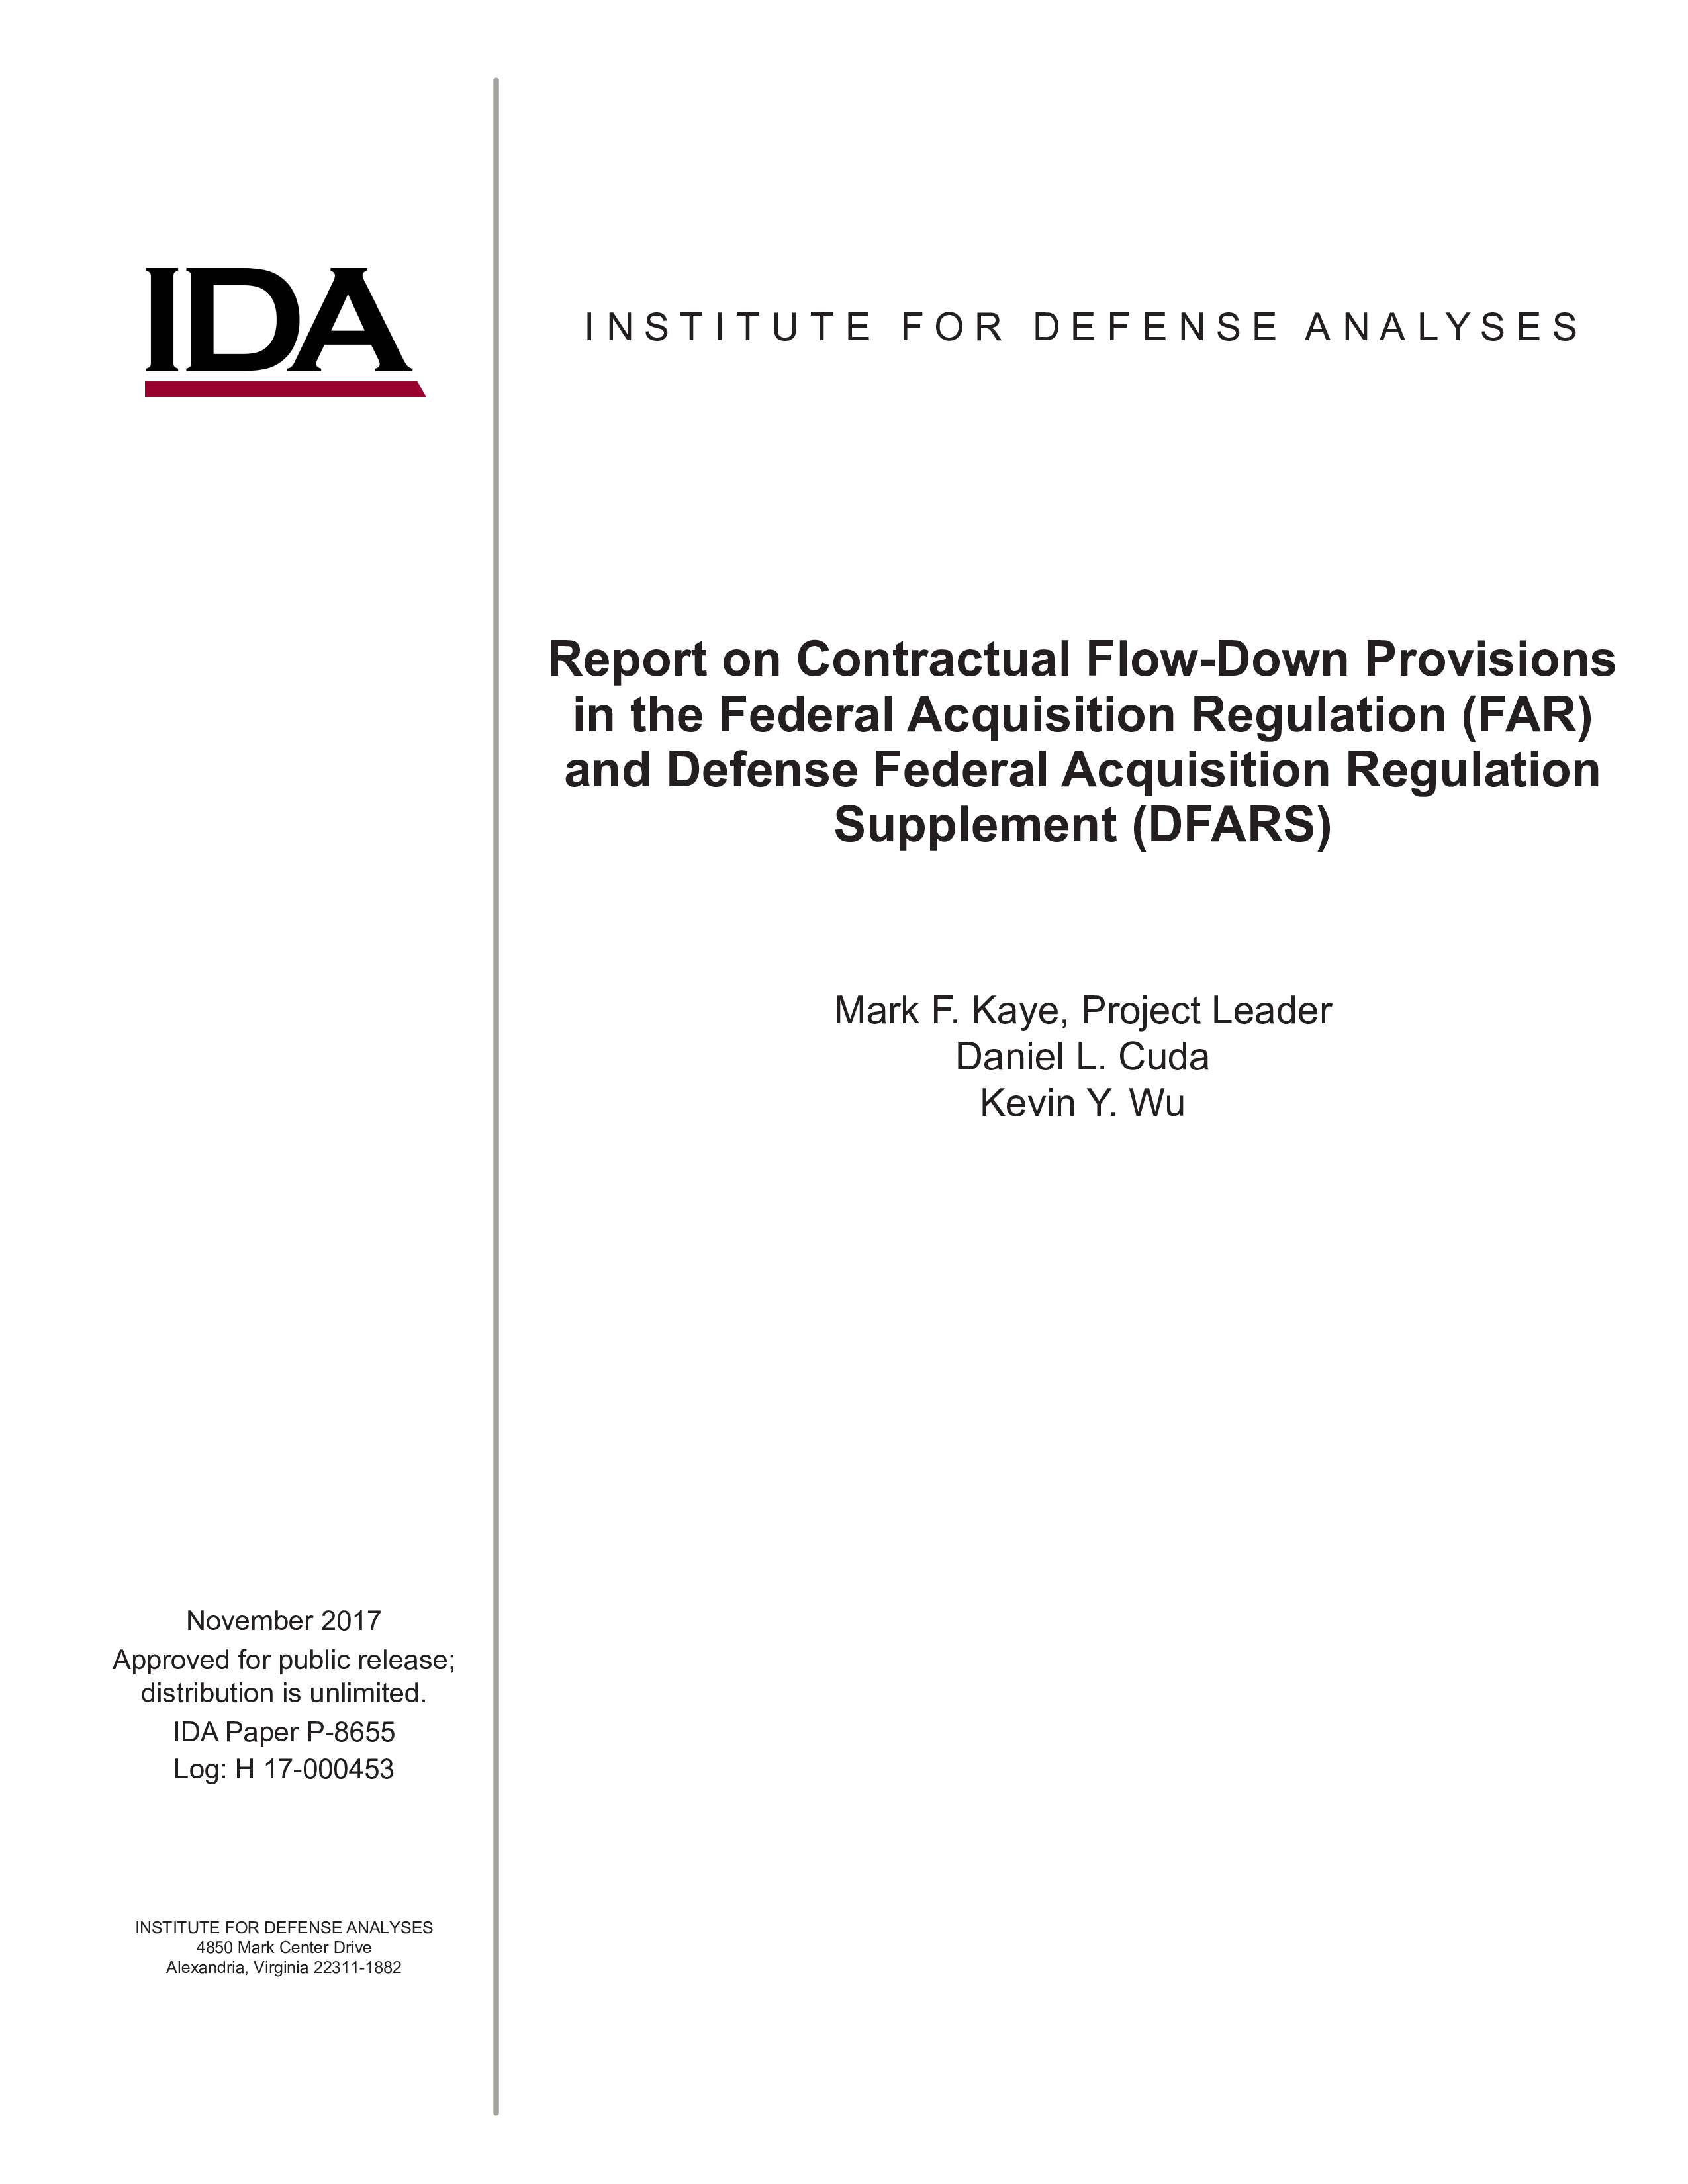 Report on Contractual Flow-Down Provisions in the Federal Acquisition Regulation (FAR) and Defense Federal Acquisition Regulation Supplement (DFARS)